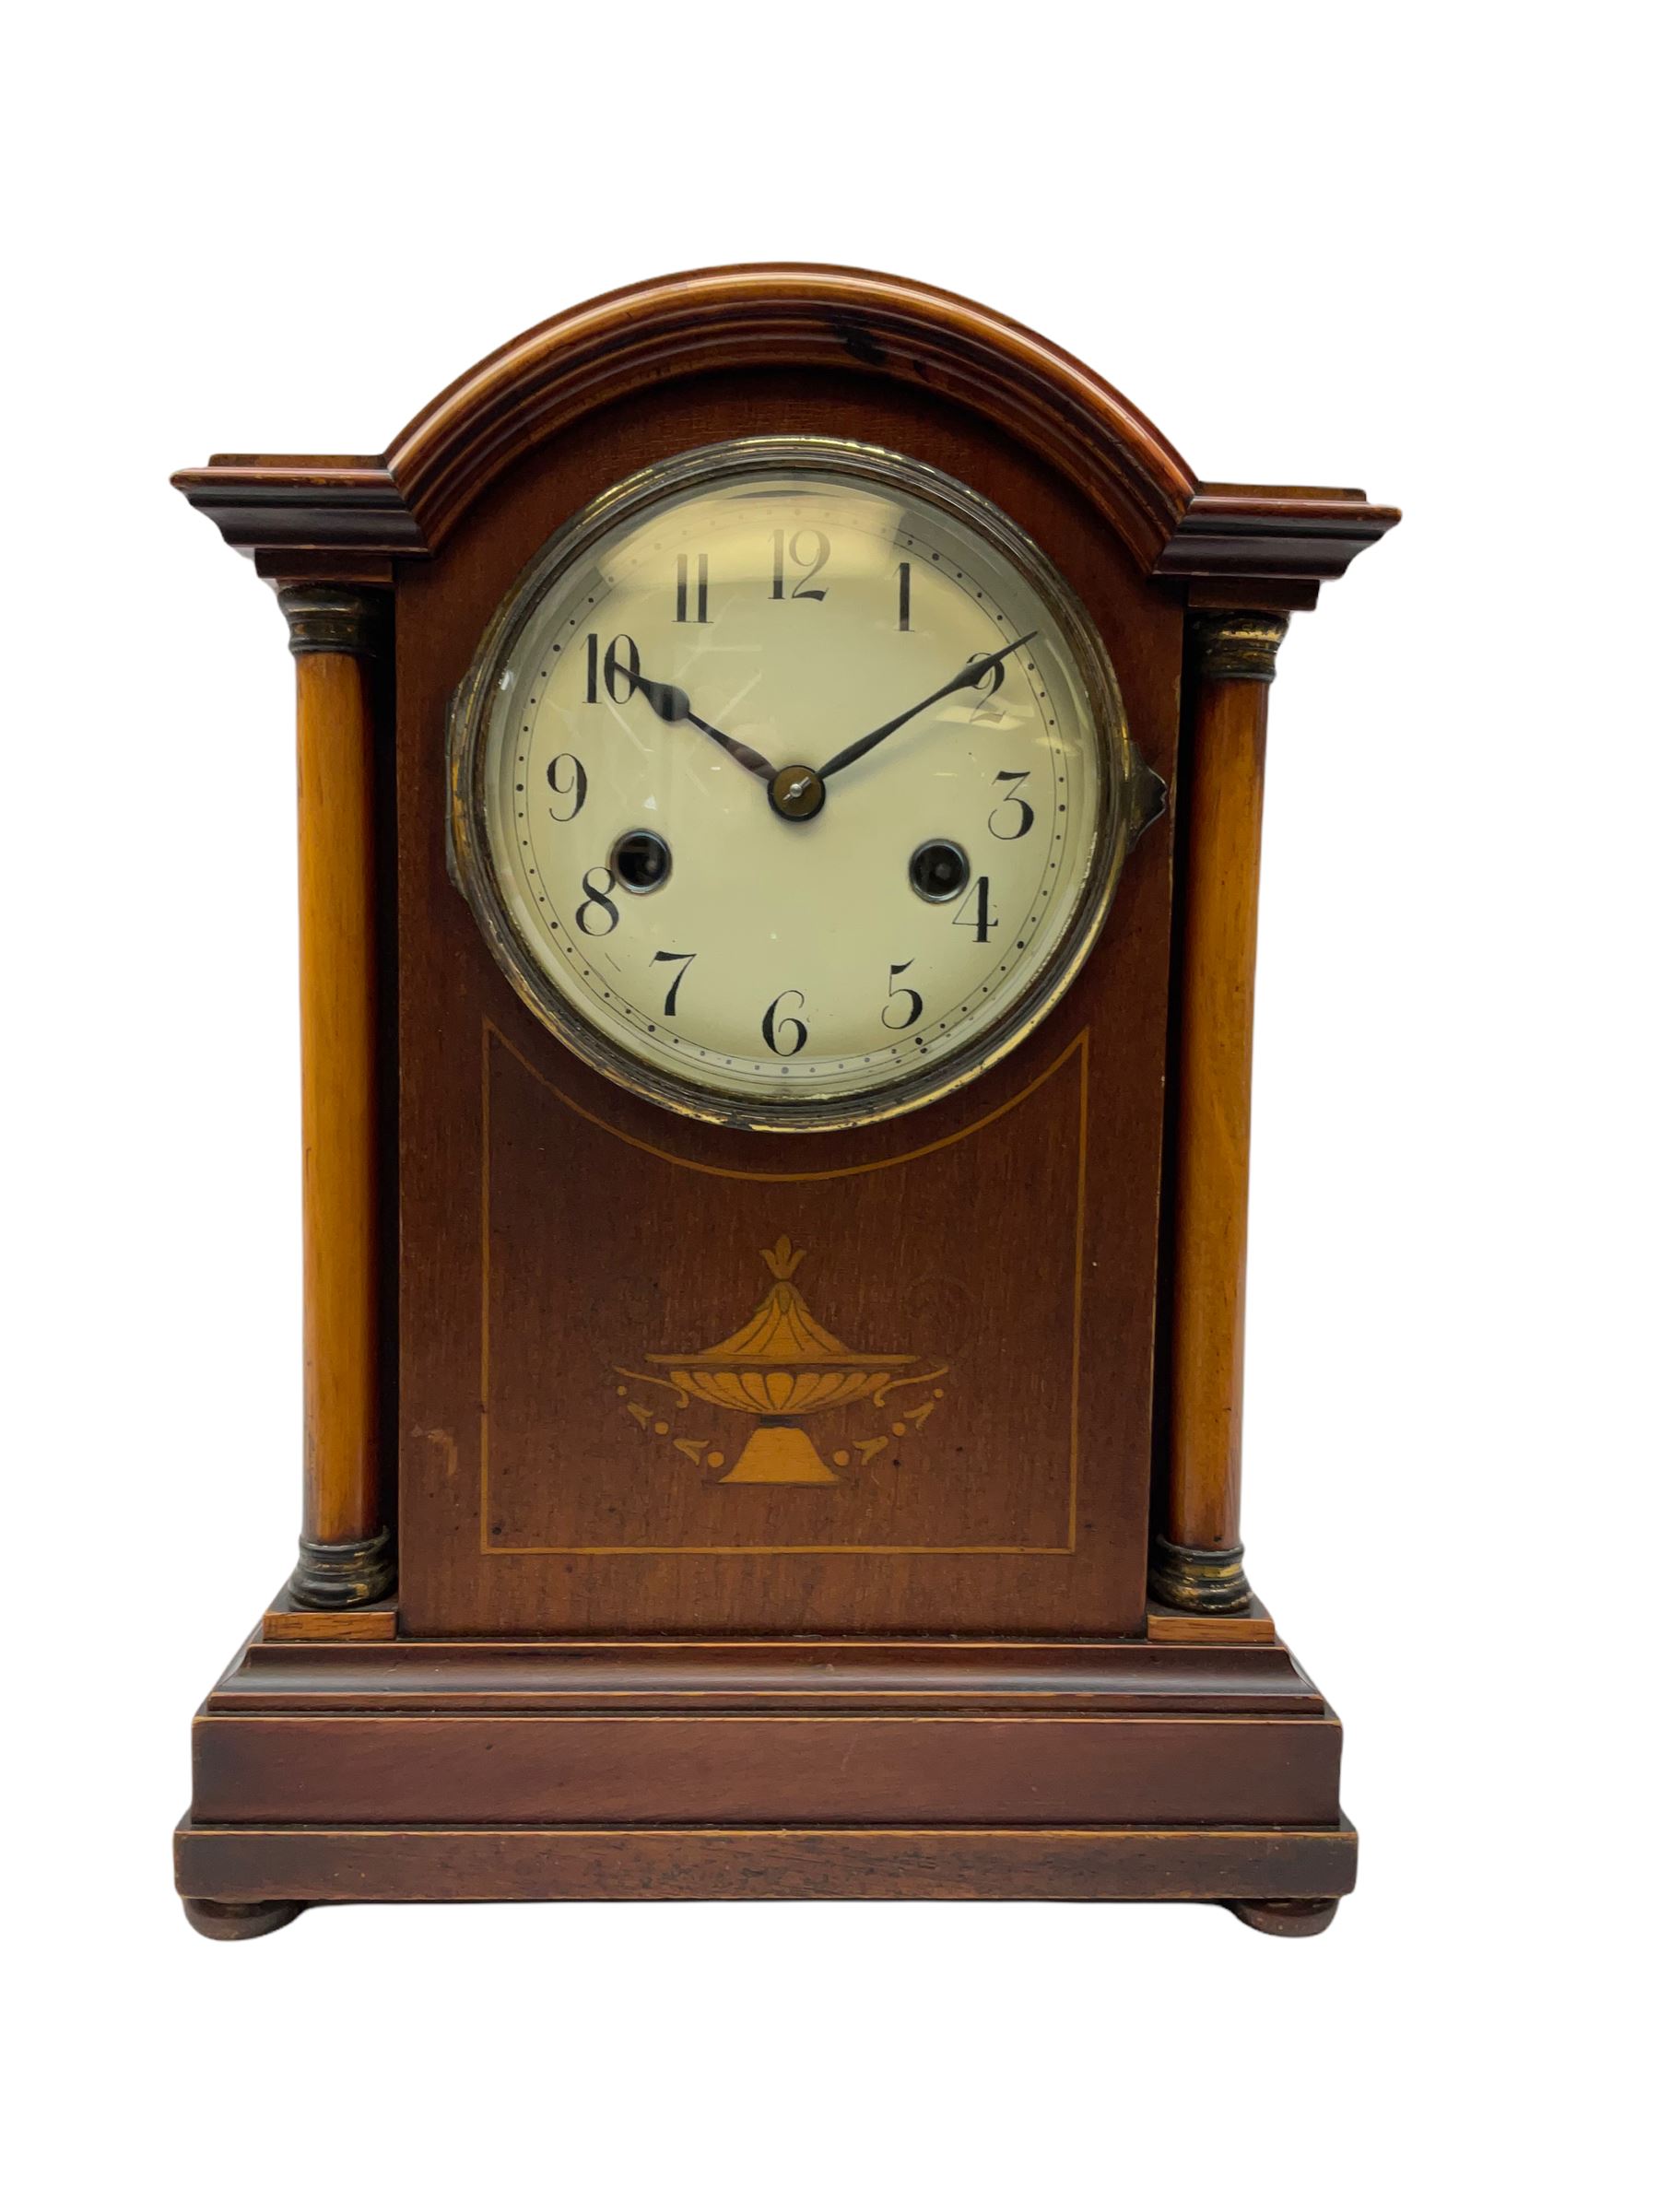 An early 20th century mantle clock in a mahogany case with a break arch pediment - Image 2 of 3